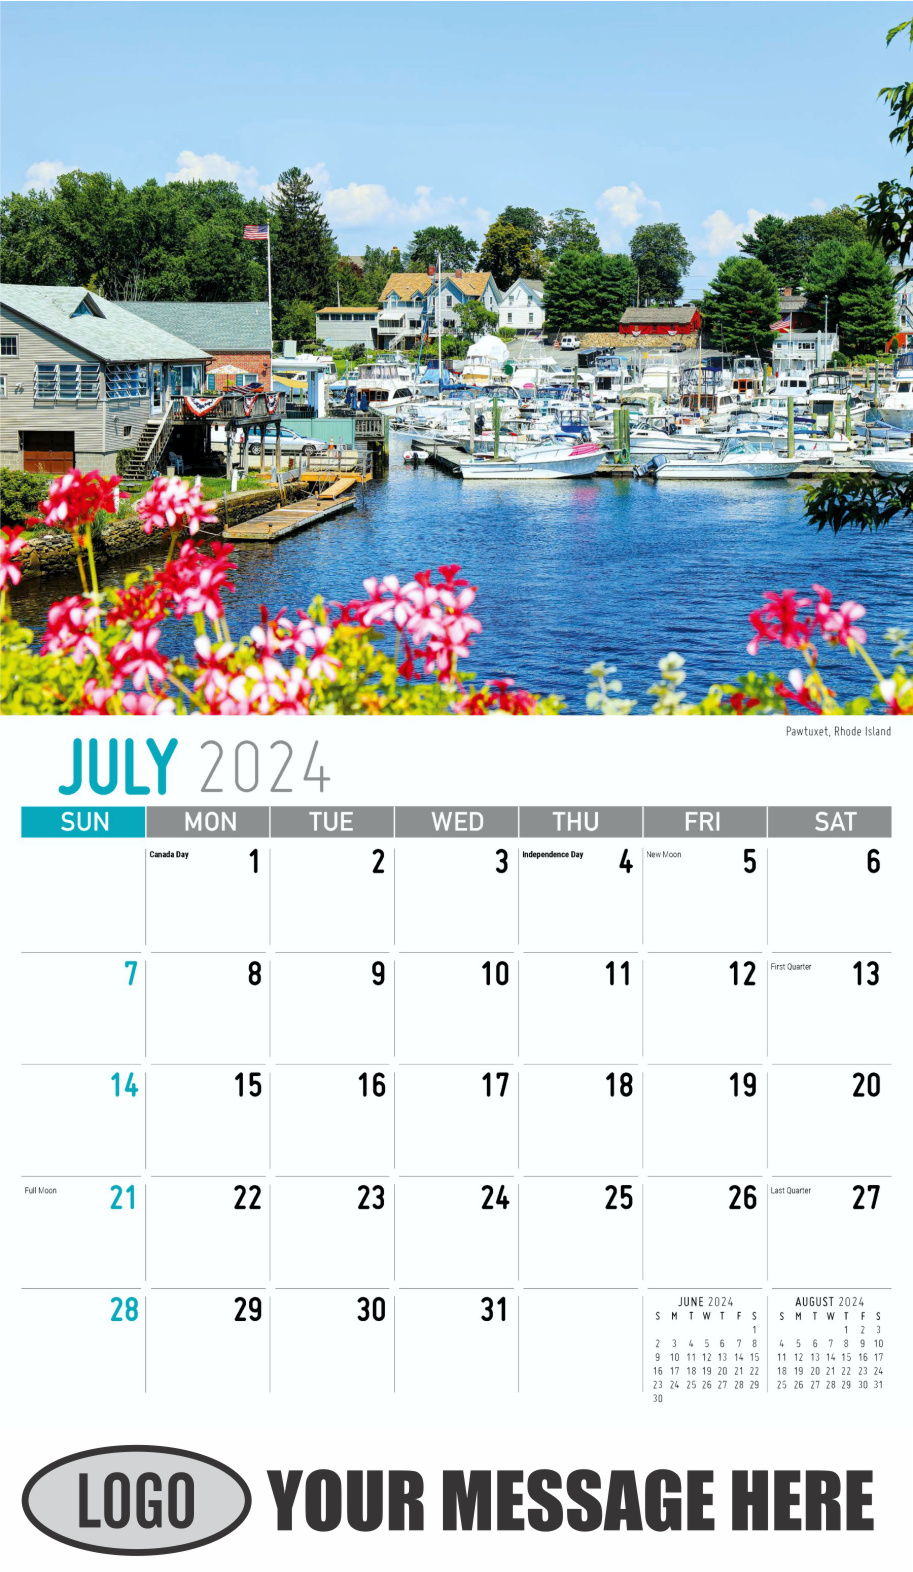 Scenes of New England 2024 Business Advertising Wall Calendar - July